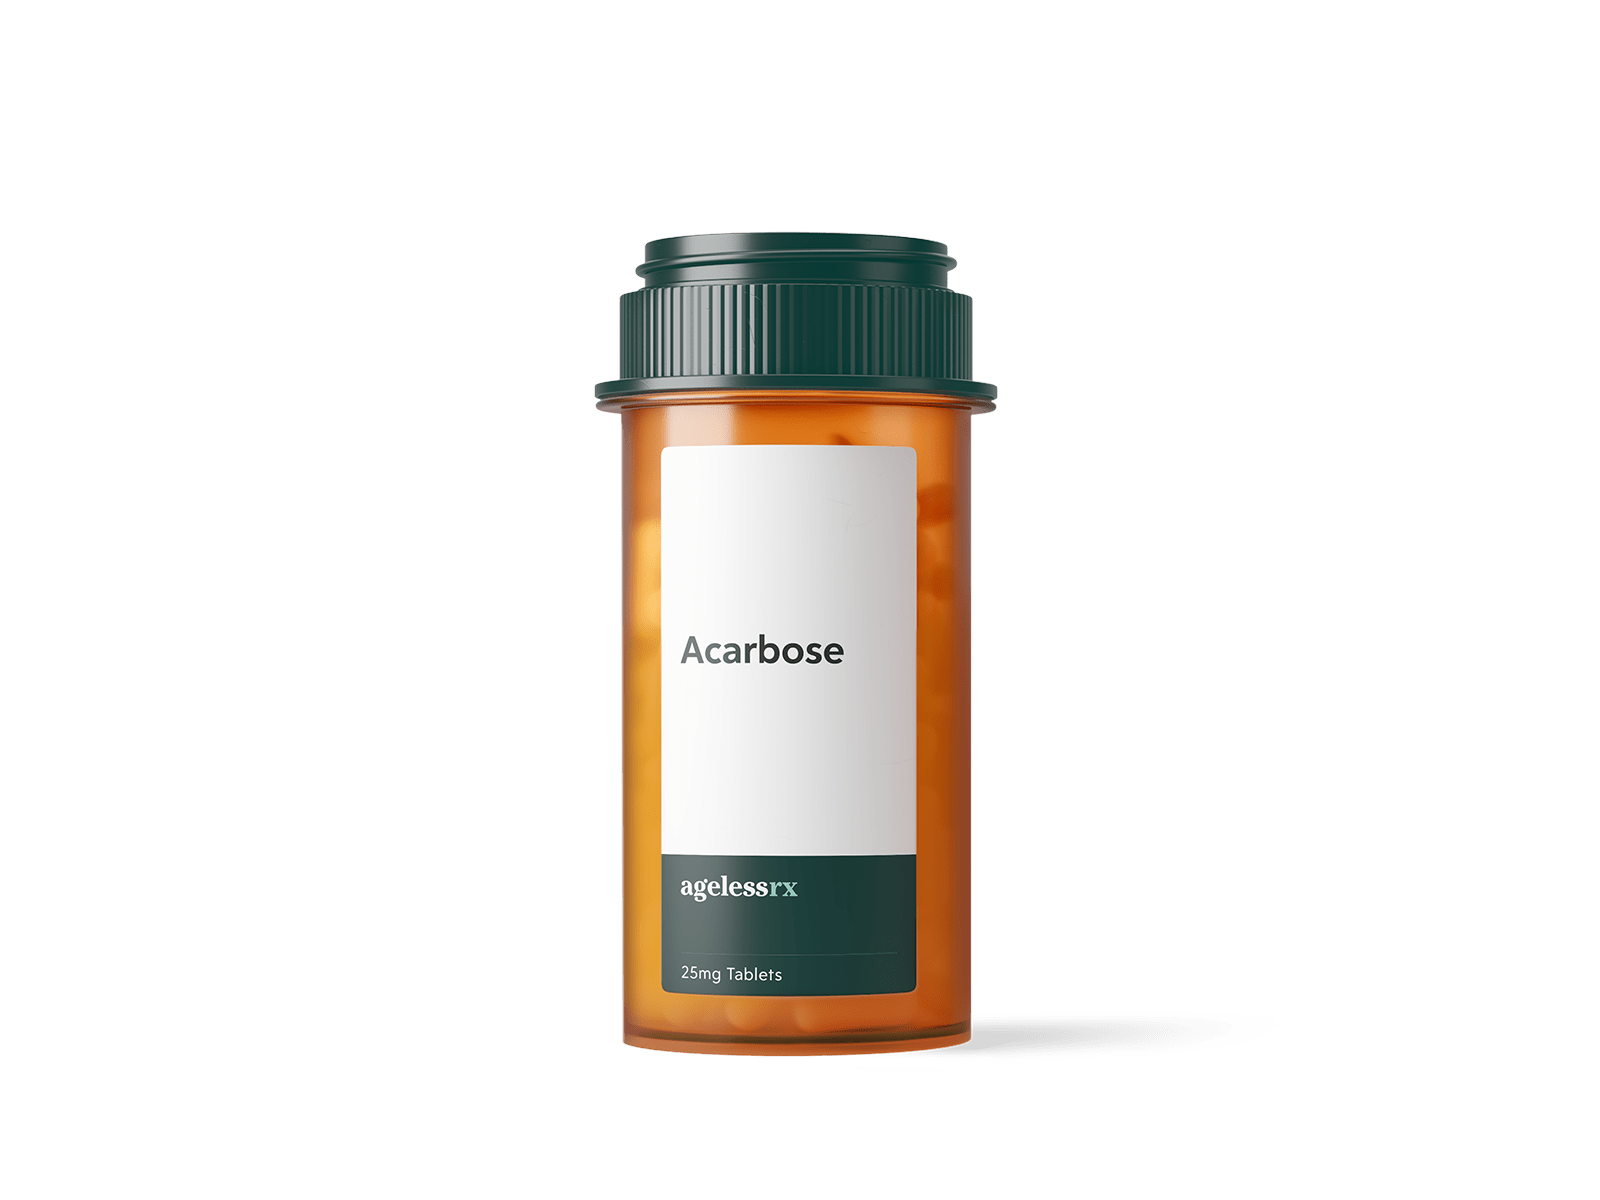 Product image for Acarbose